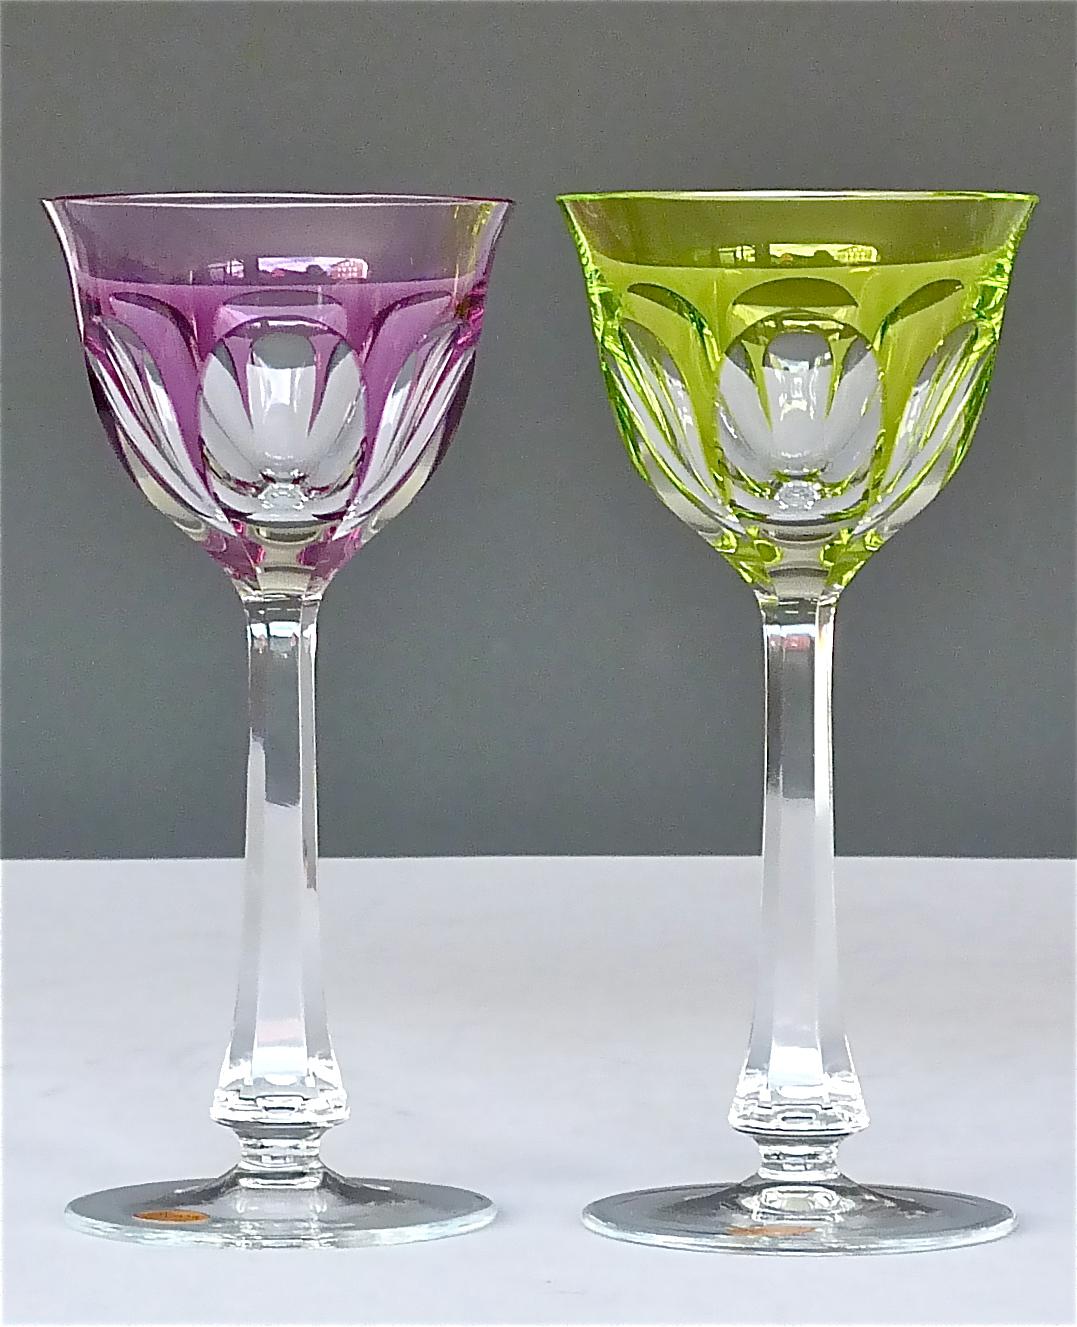 Set of 2 Crystal Glasses by Moser Cut Glass Czechoslovakia